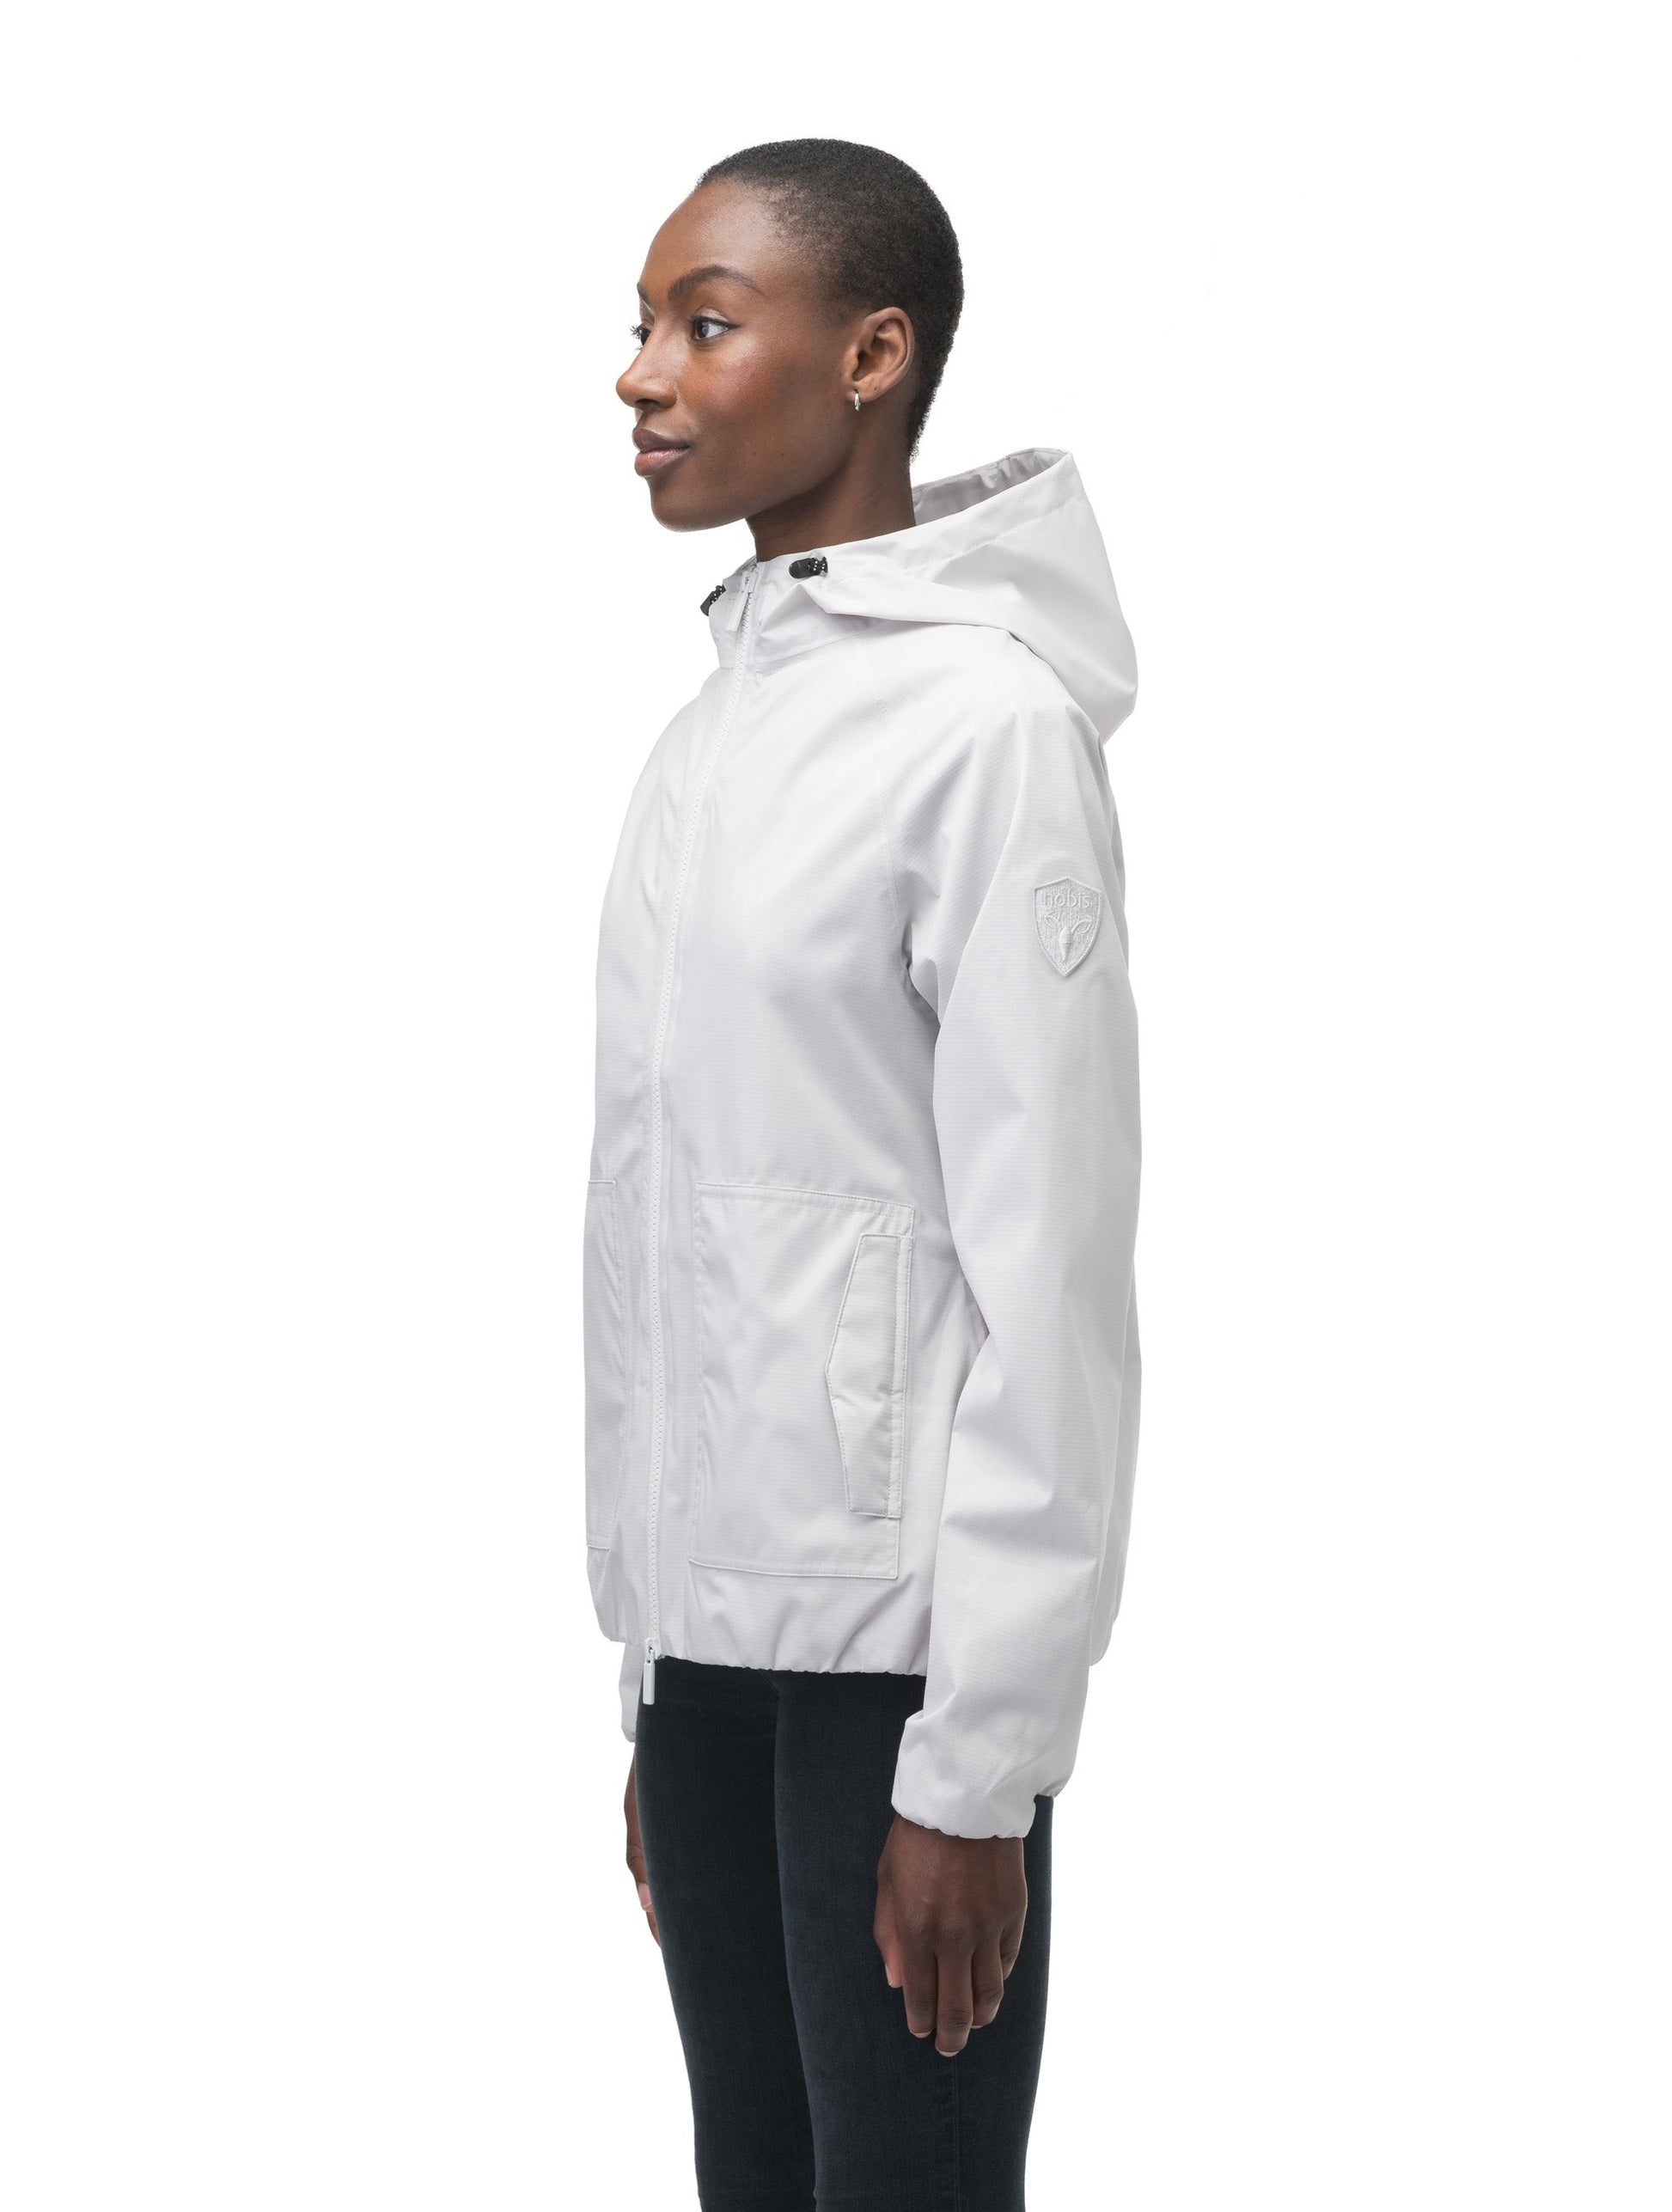 Women's hip length waterproof jacket with non-removable hood and two-way zipper in Light Grey